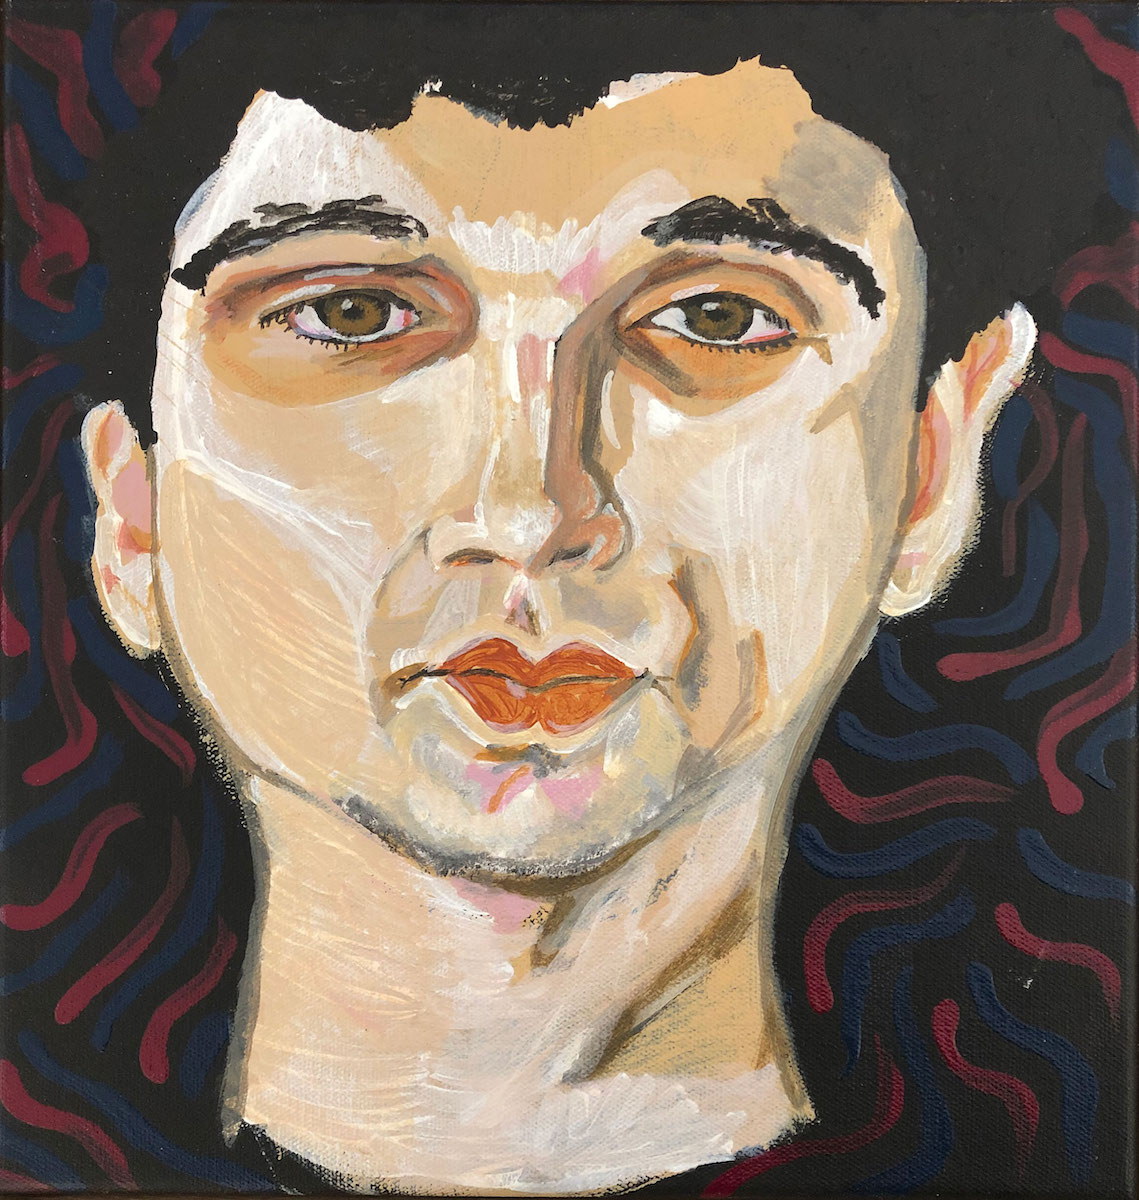 Portrait of a person's face against a background of red and blue wavy lines on a black background